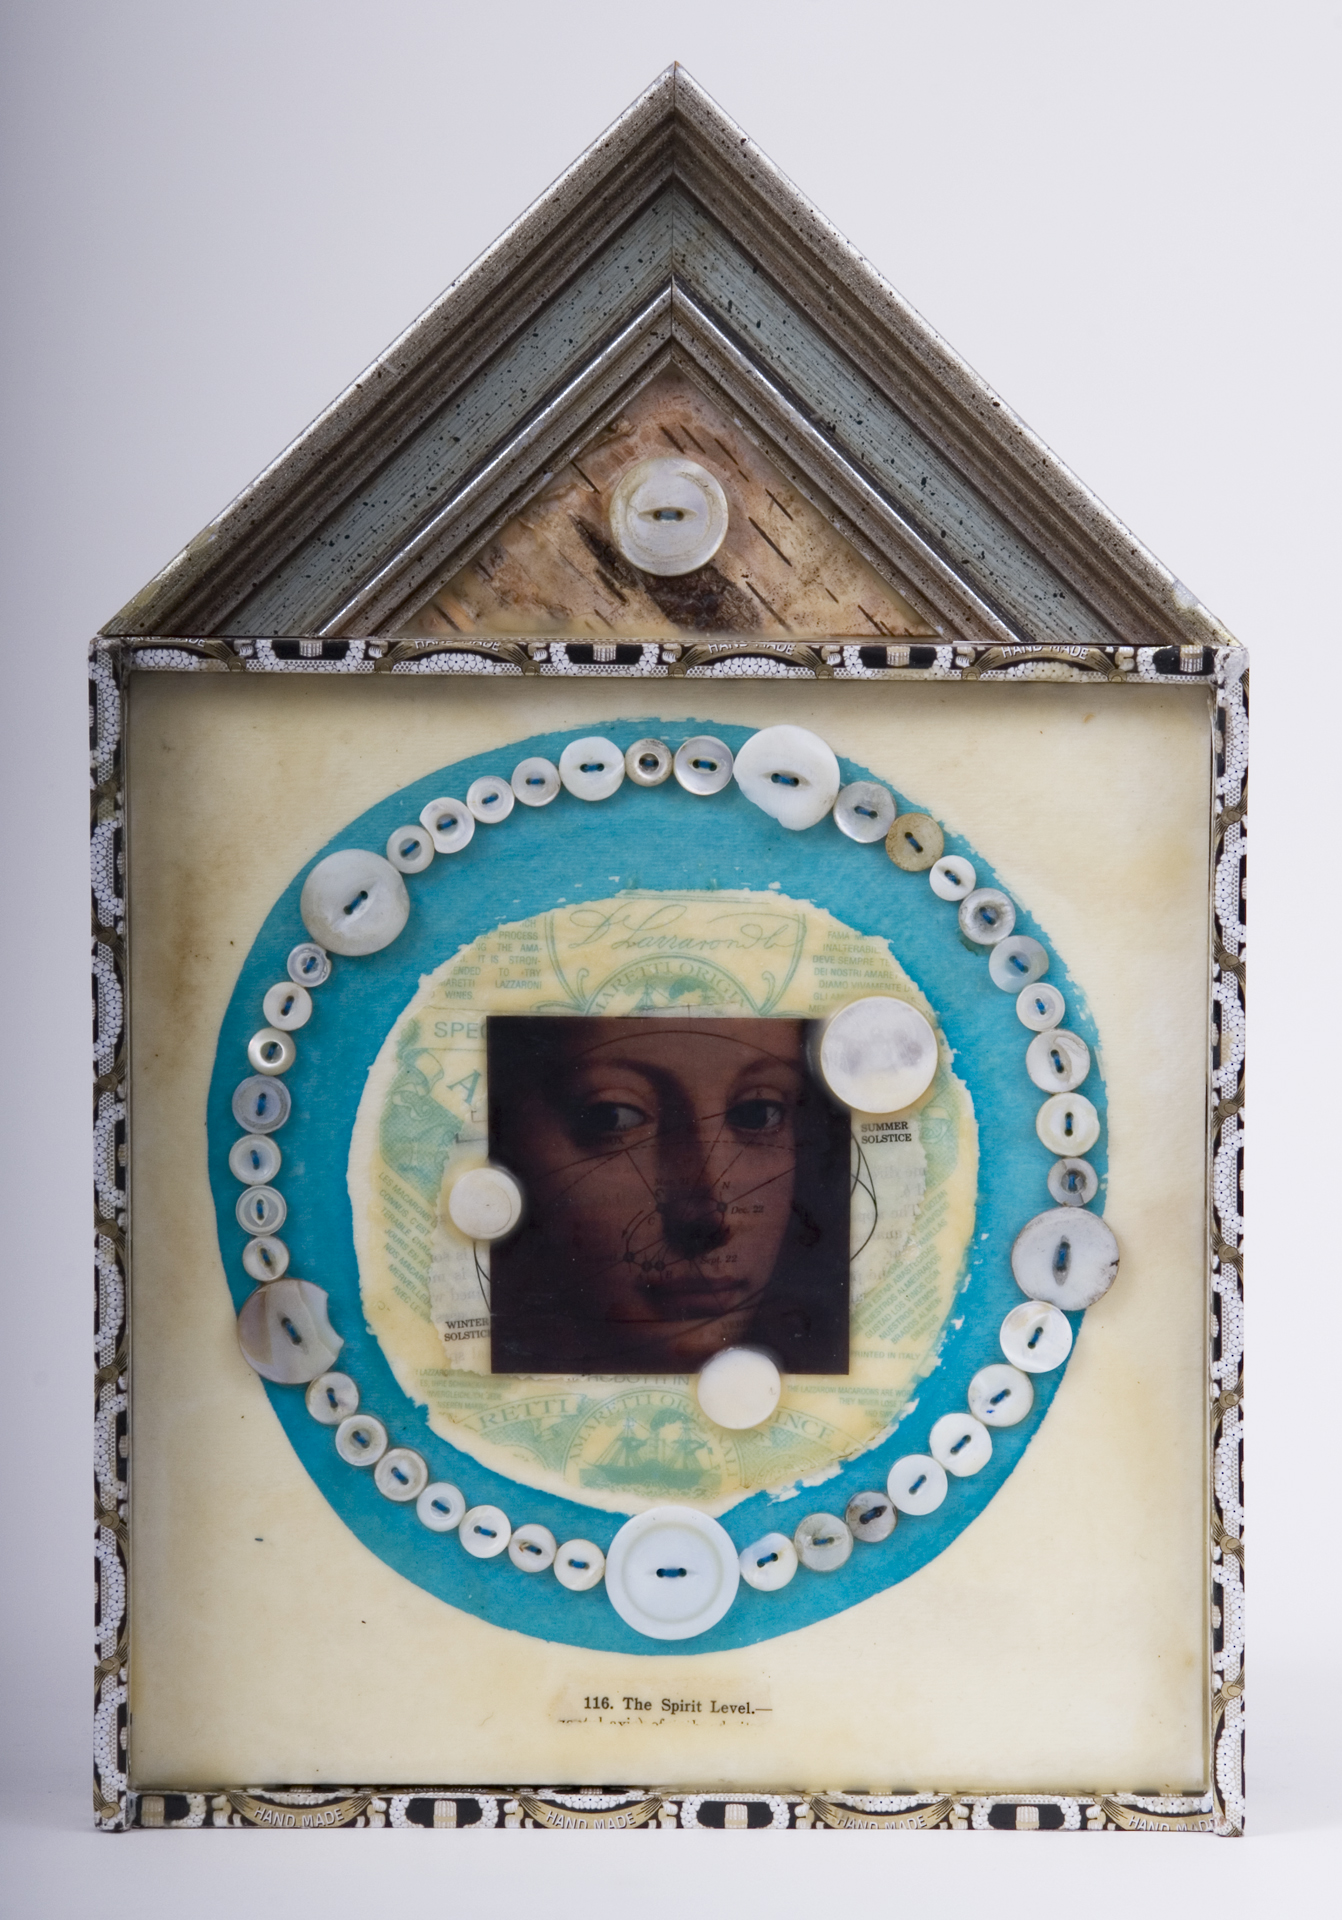     \"116. The Spirit Level\"
    mixed-media assemblage
    14.5 x 9.5 x 1.5
    2009
    SOLD
    Cigar box, frame sample, birch bark, mother of pearl buttons, transparency, cookie wrapper, ink, wax, astronomy text on watercolor paper